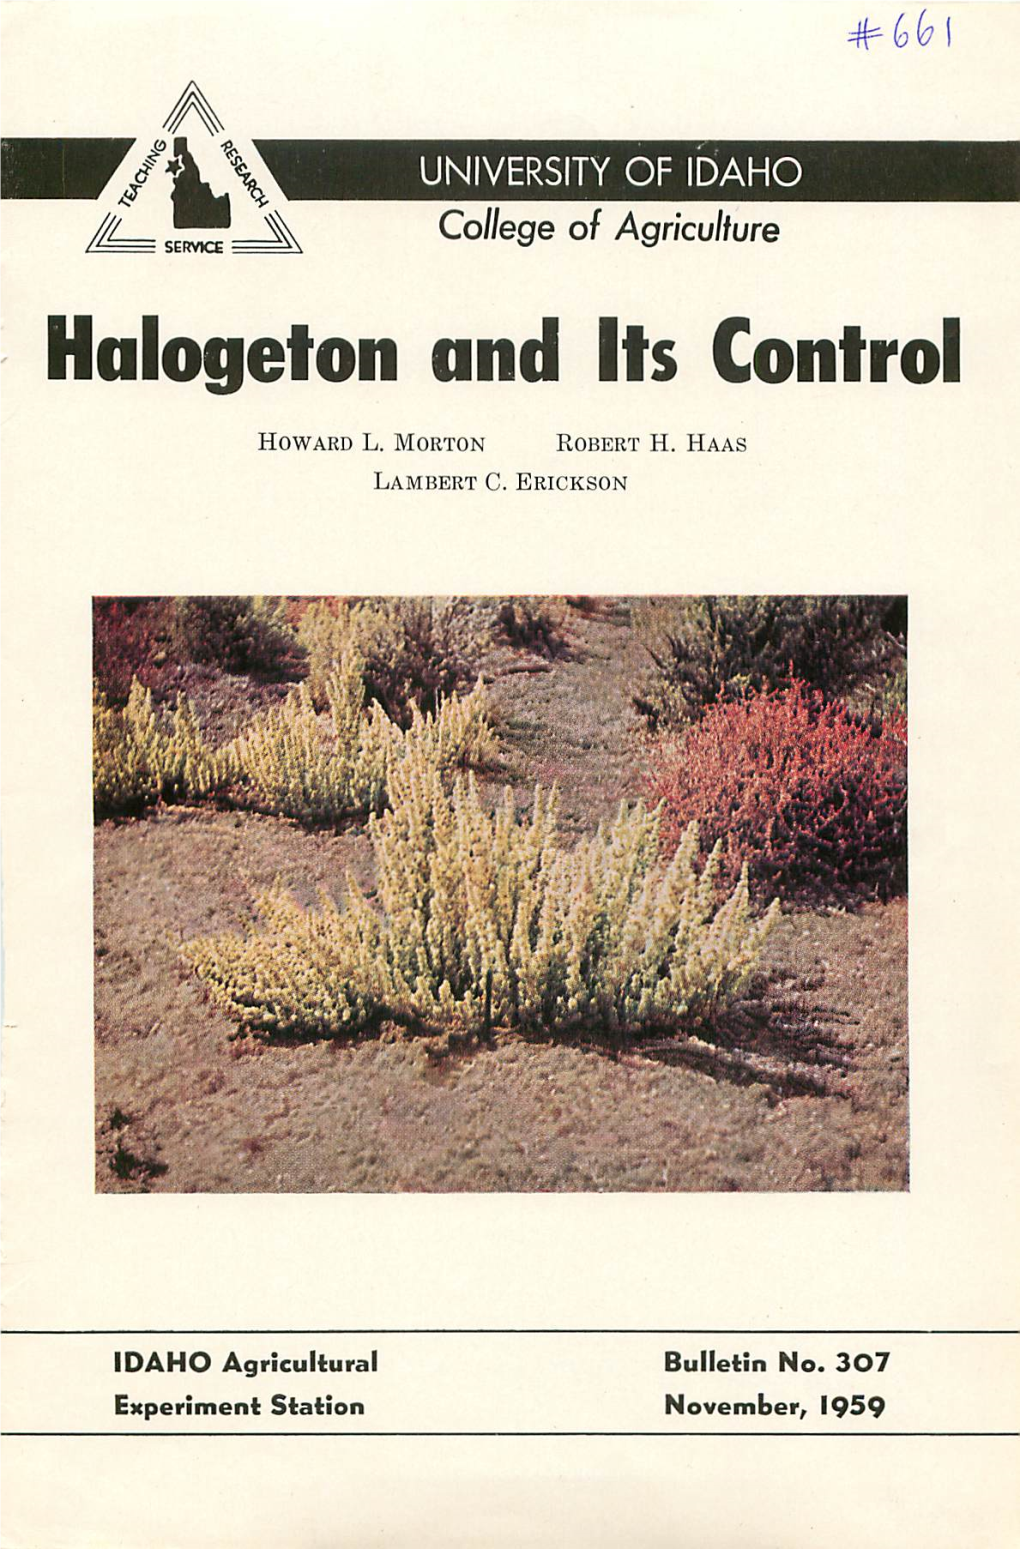 Halogeton and Its Control